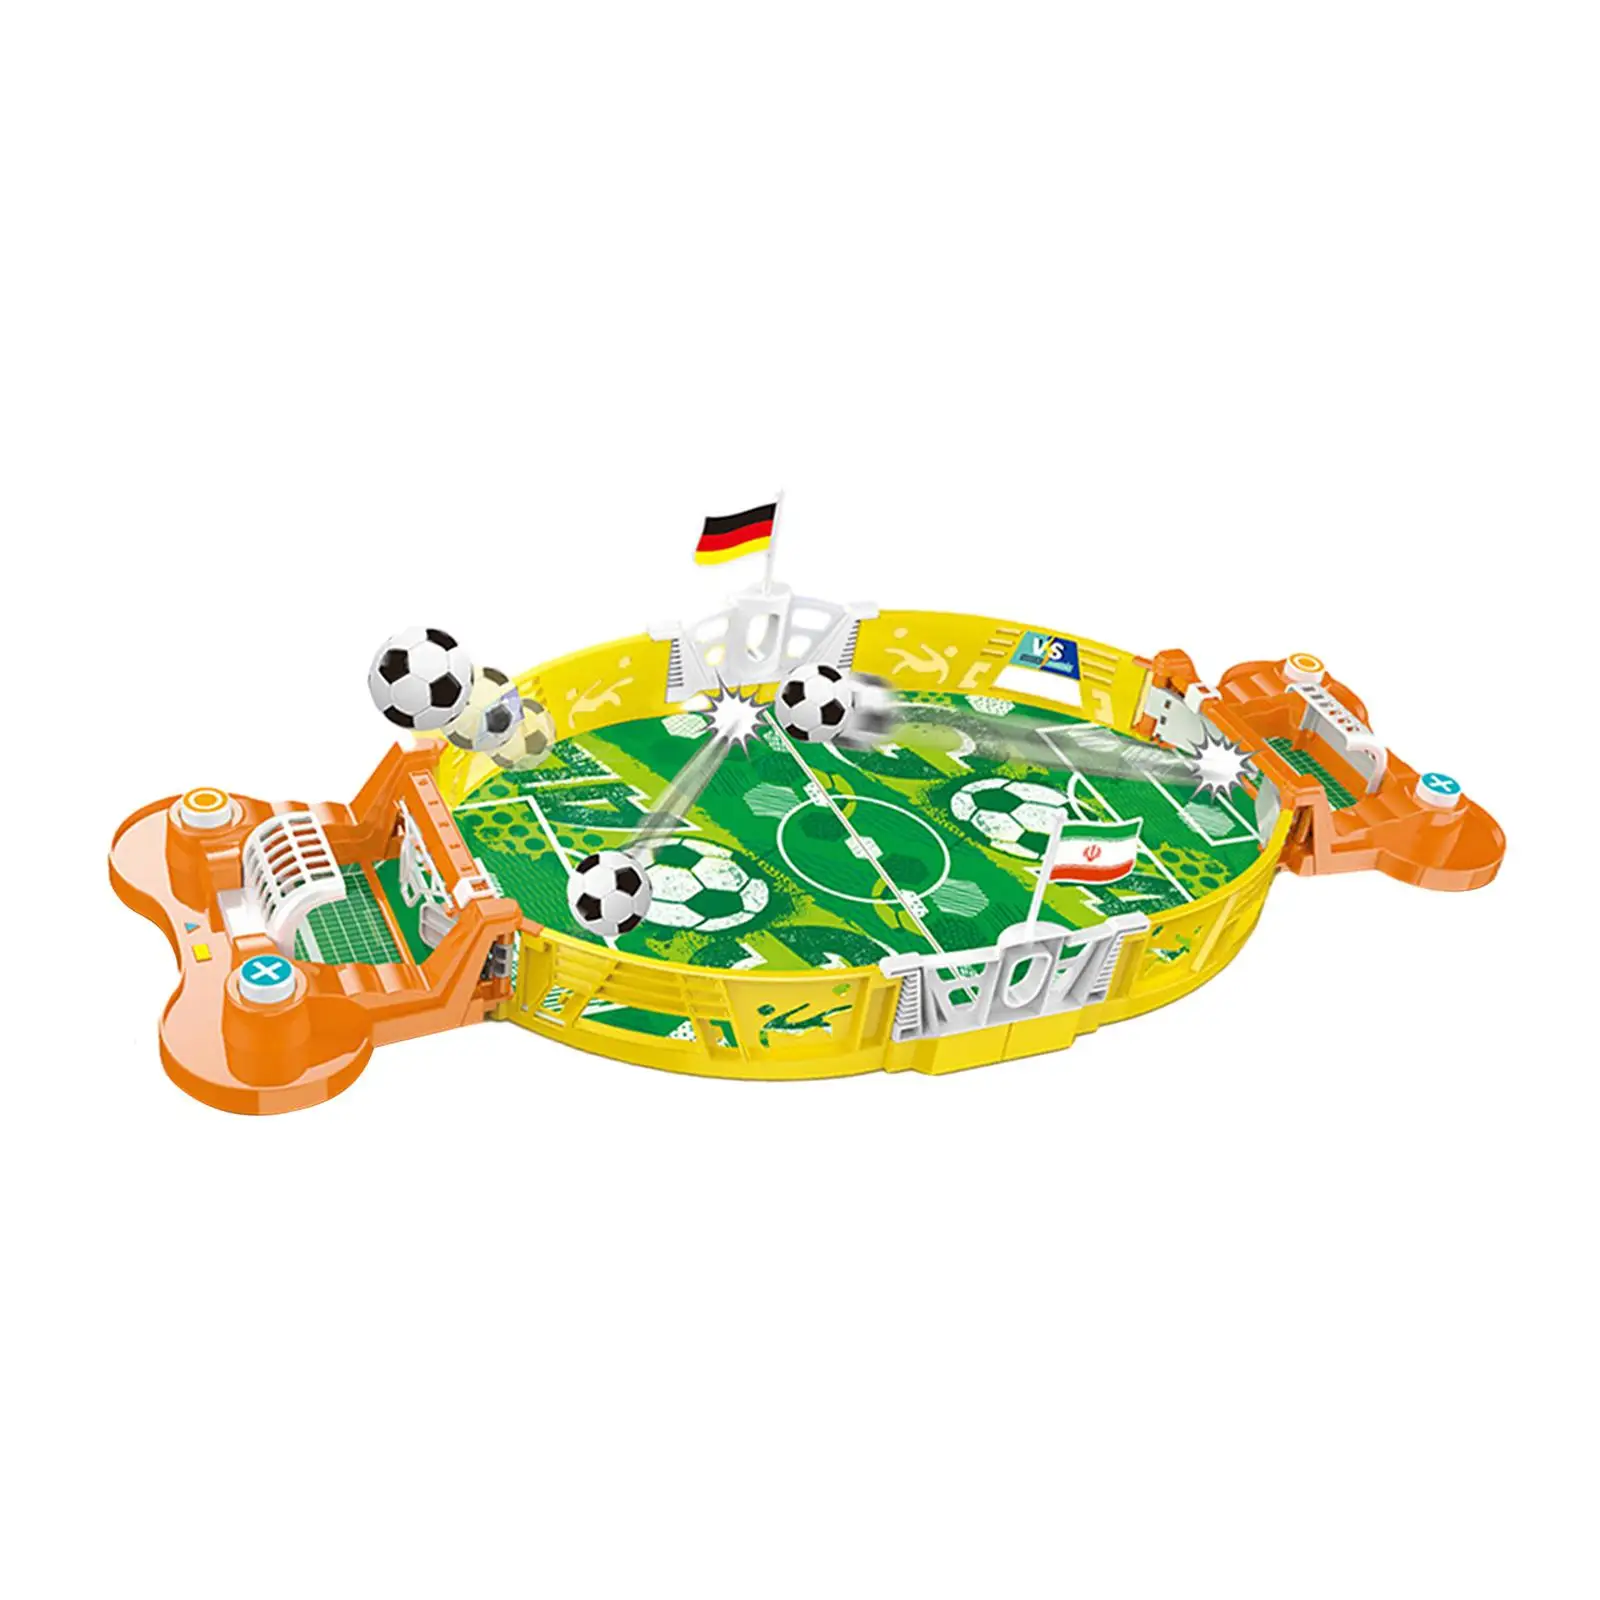 Mini Table Soccer Game Mini Foosball Games Arcade for Indoor Game Tabletop Football Game Toy for Kids Adults Children